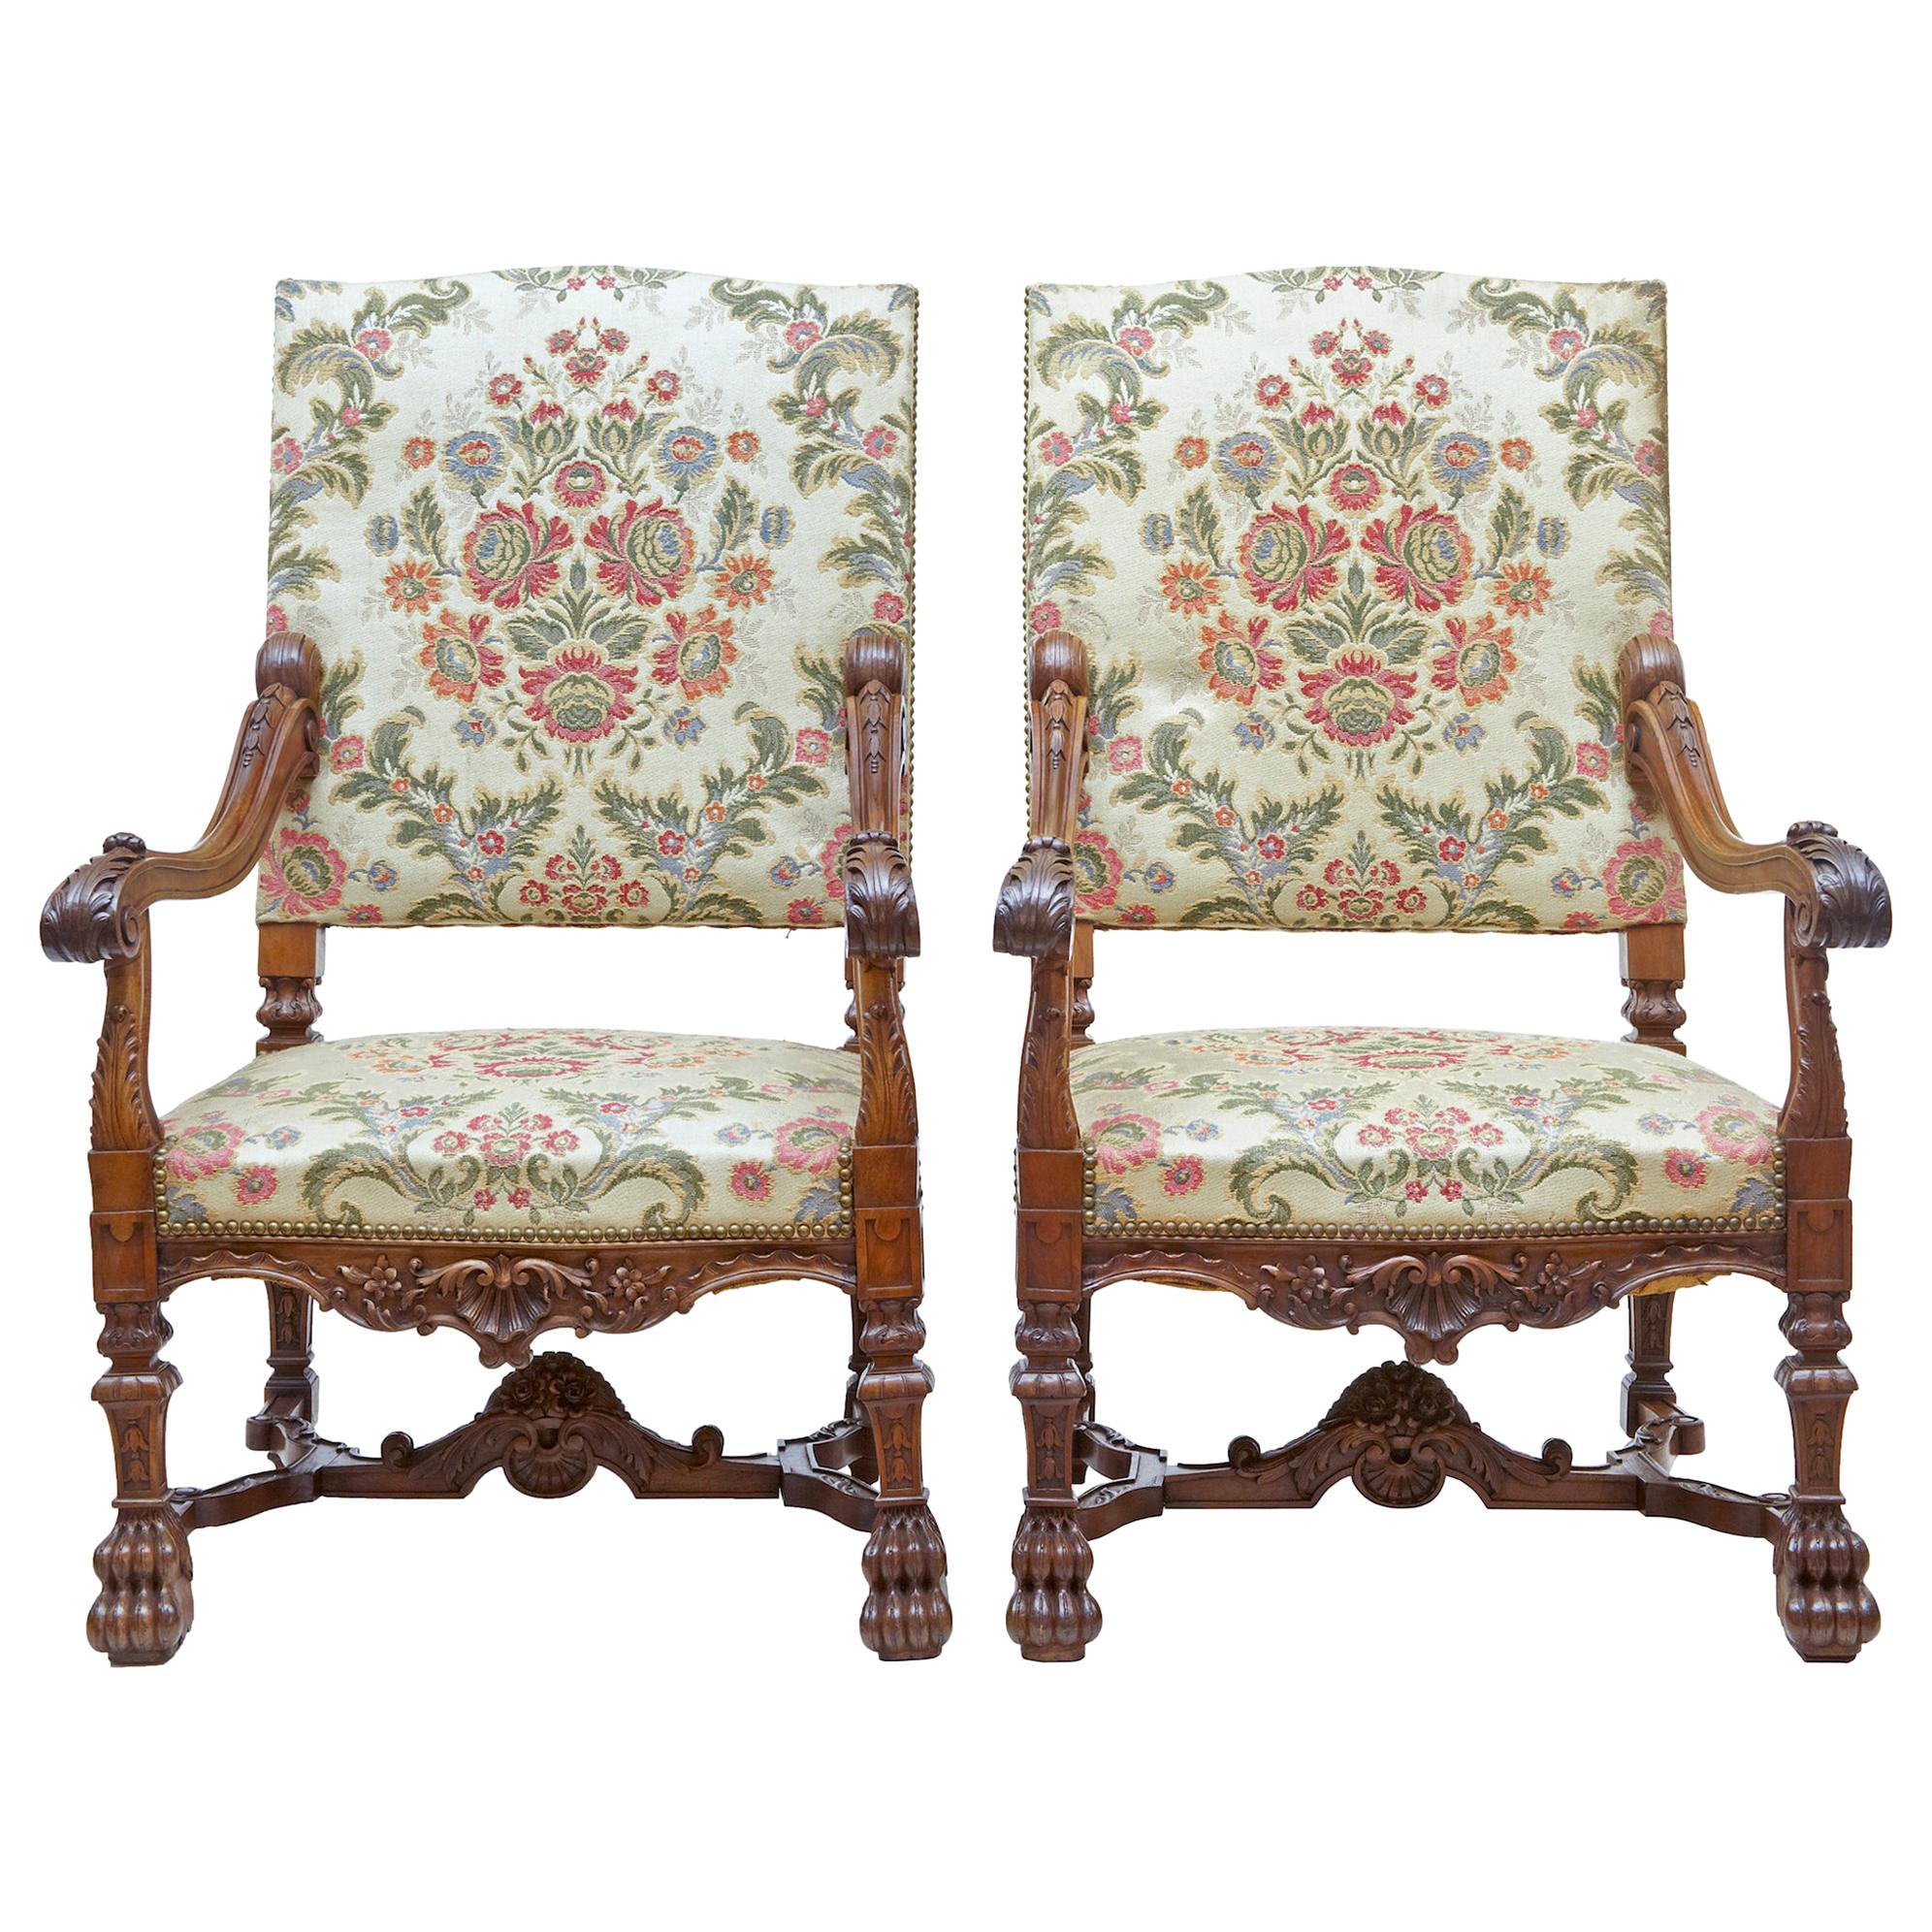 Superb Pair of 19th Century Carved Walnut French Armchairs